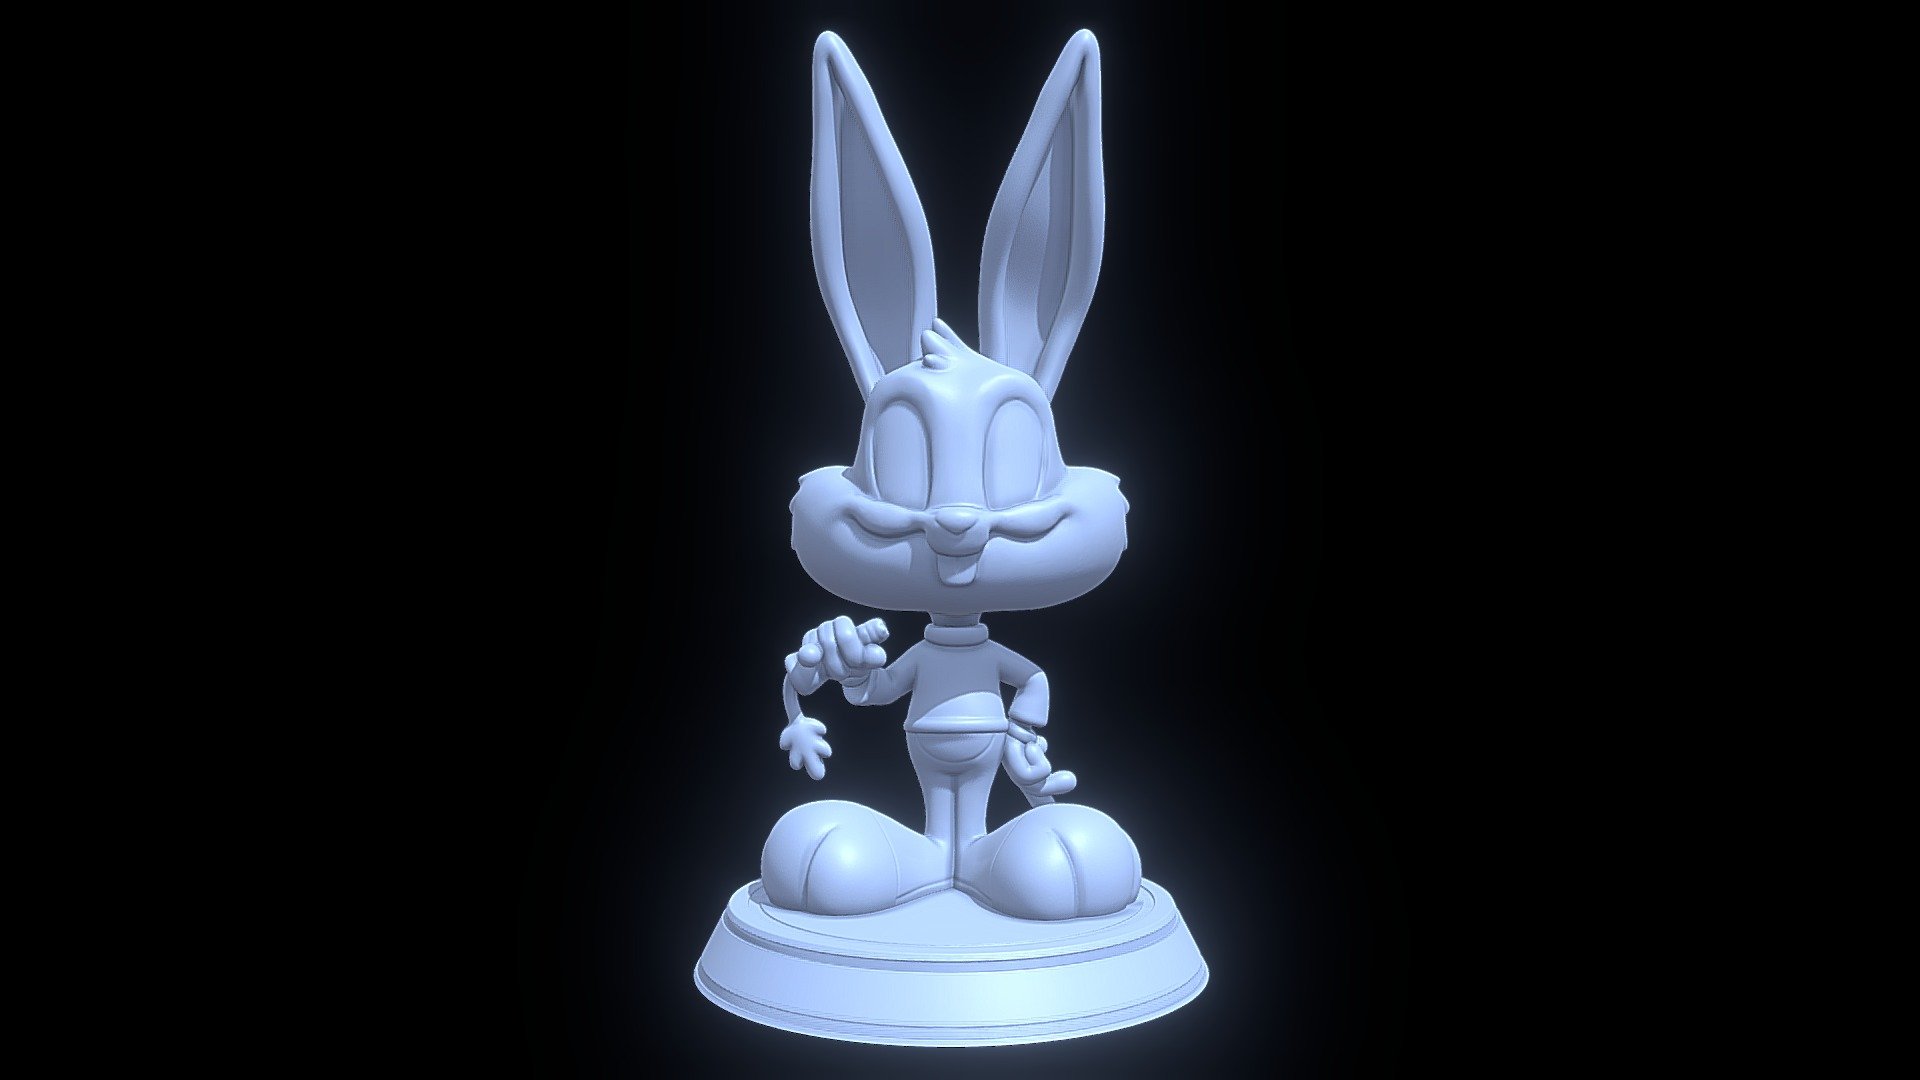 Character from  Tiny Toon Adventures. See the model colored here https://www.deviantart.com/sillytoys/art/Buster-Bunny-Tiny-Toon-Adventures-3D-print-model-917737585 - Buster Bunny - Tiny Toon Adventures 3D print - Buy Royalty Free 3D model by SillyToys 3d model